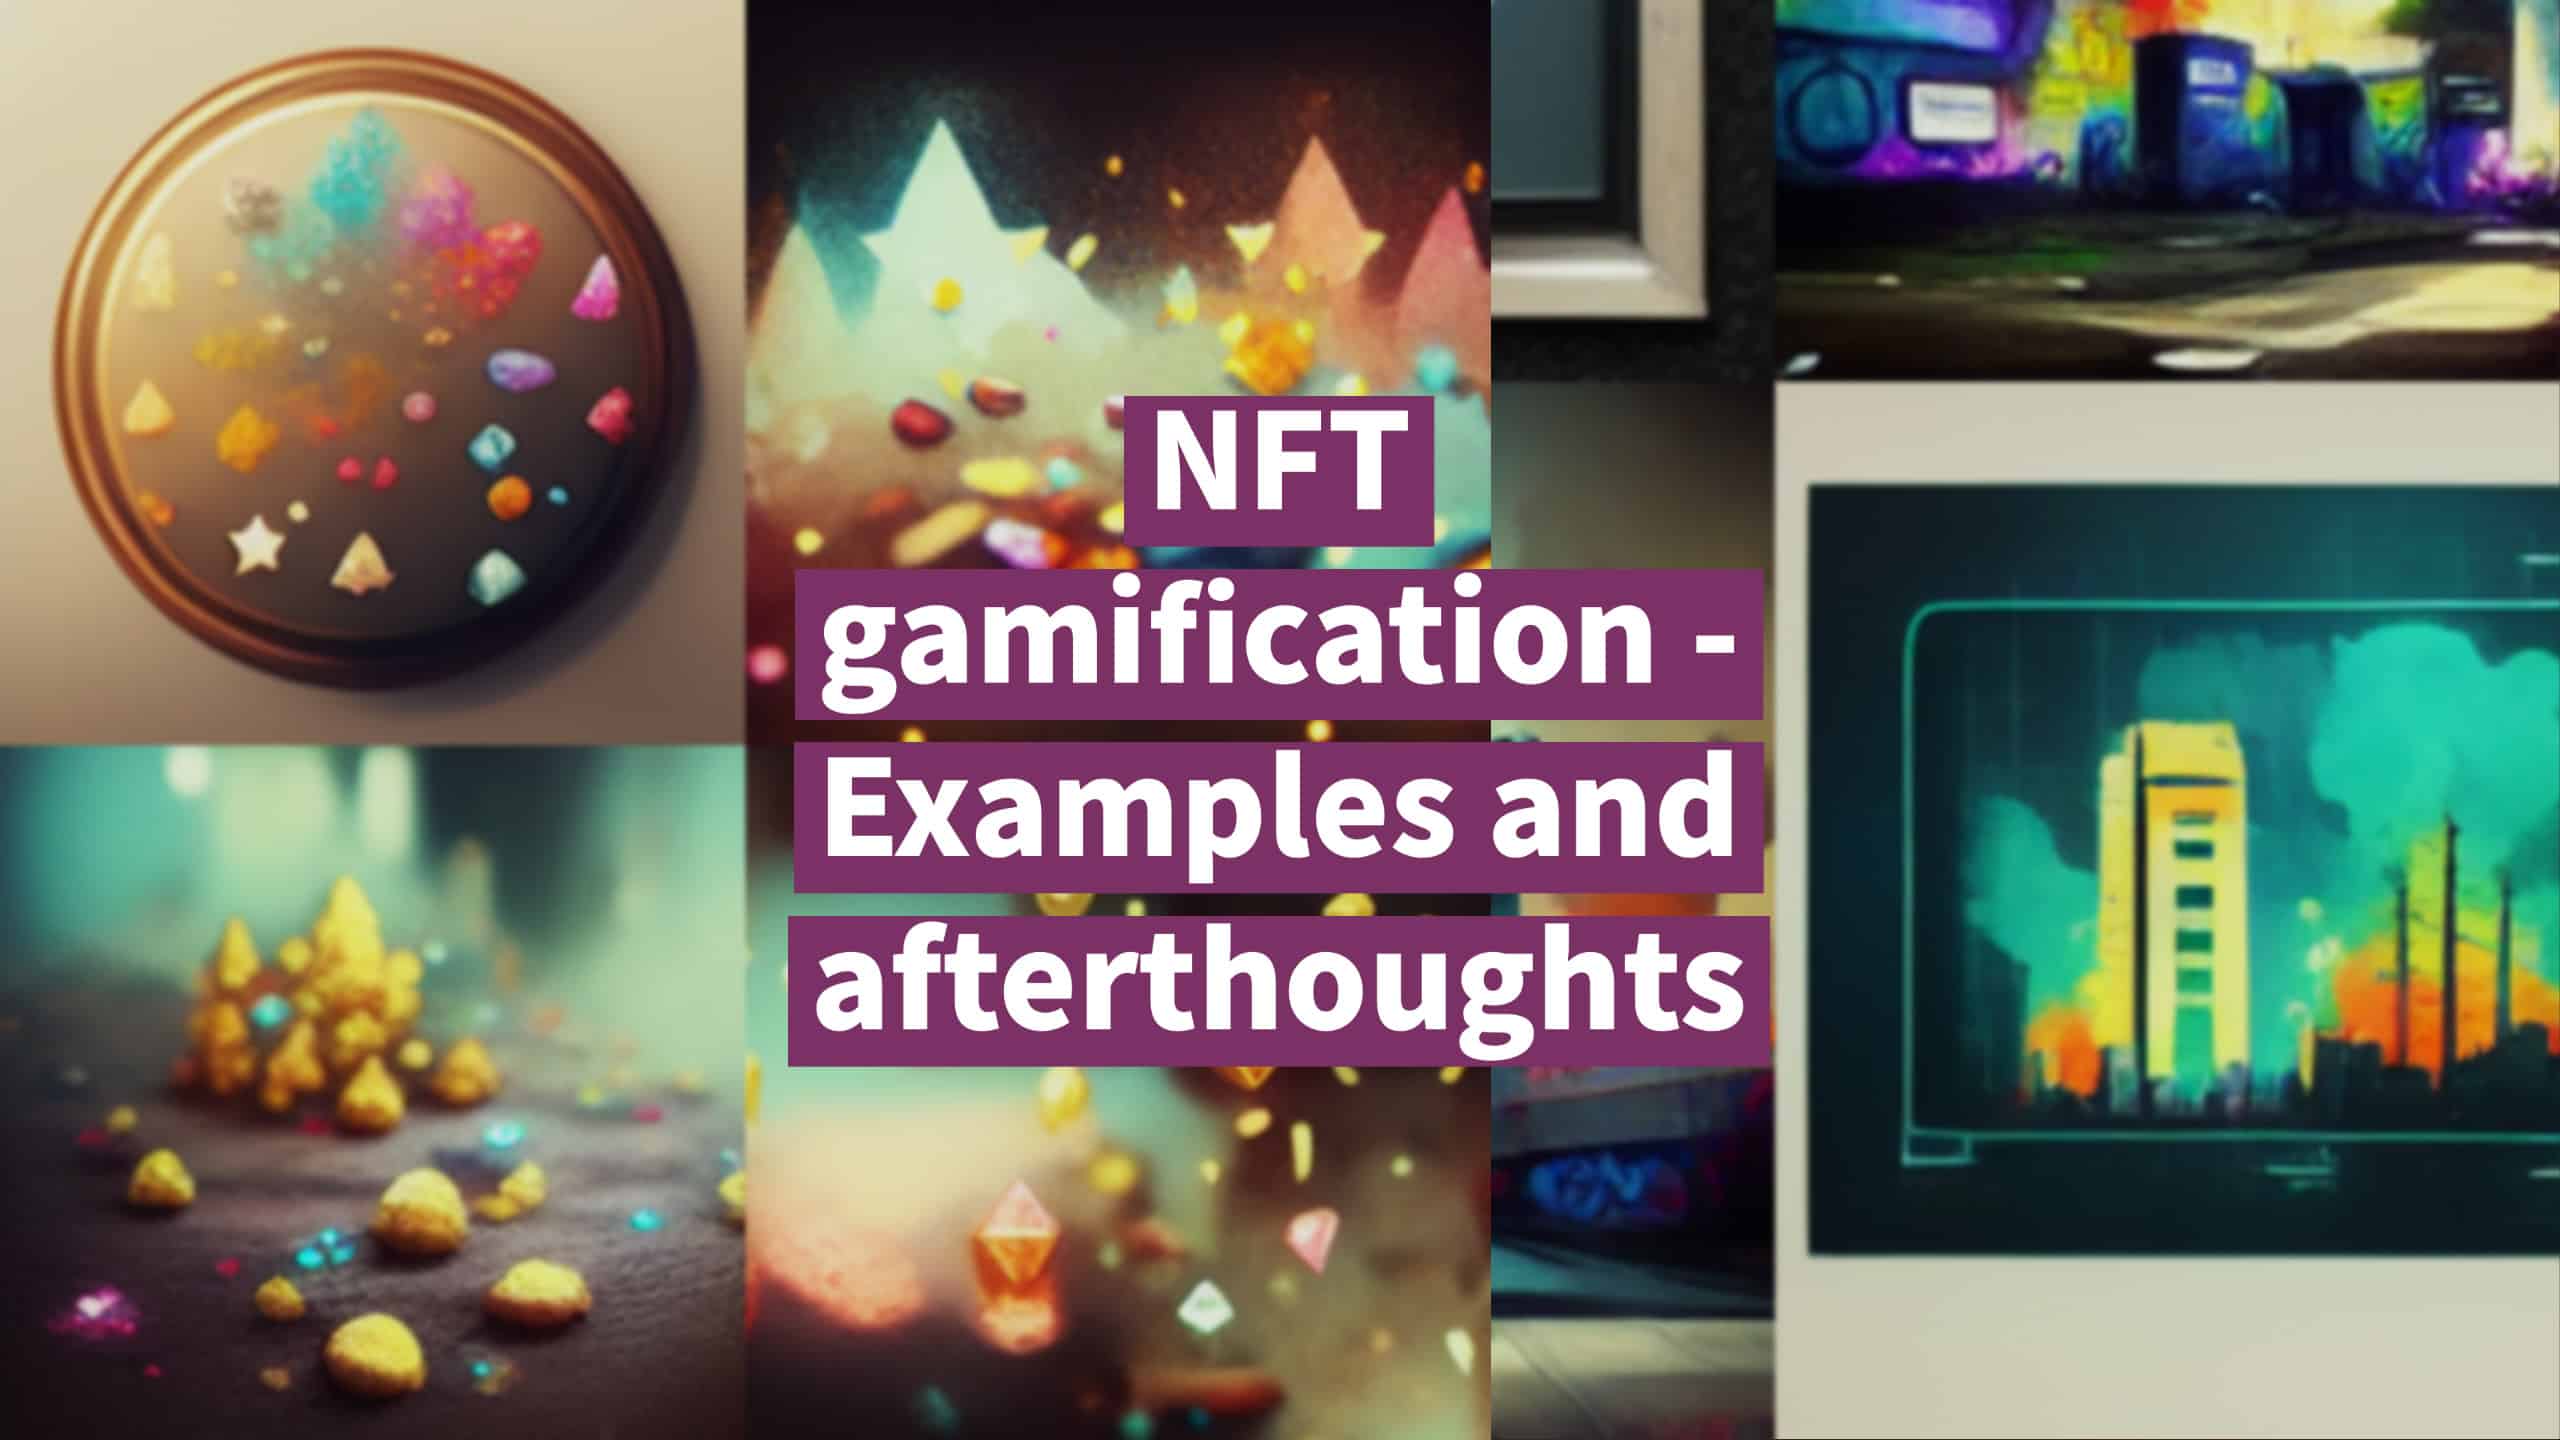 NFT gamification – Examples and Afterthoughts